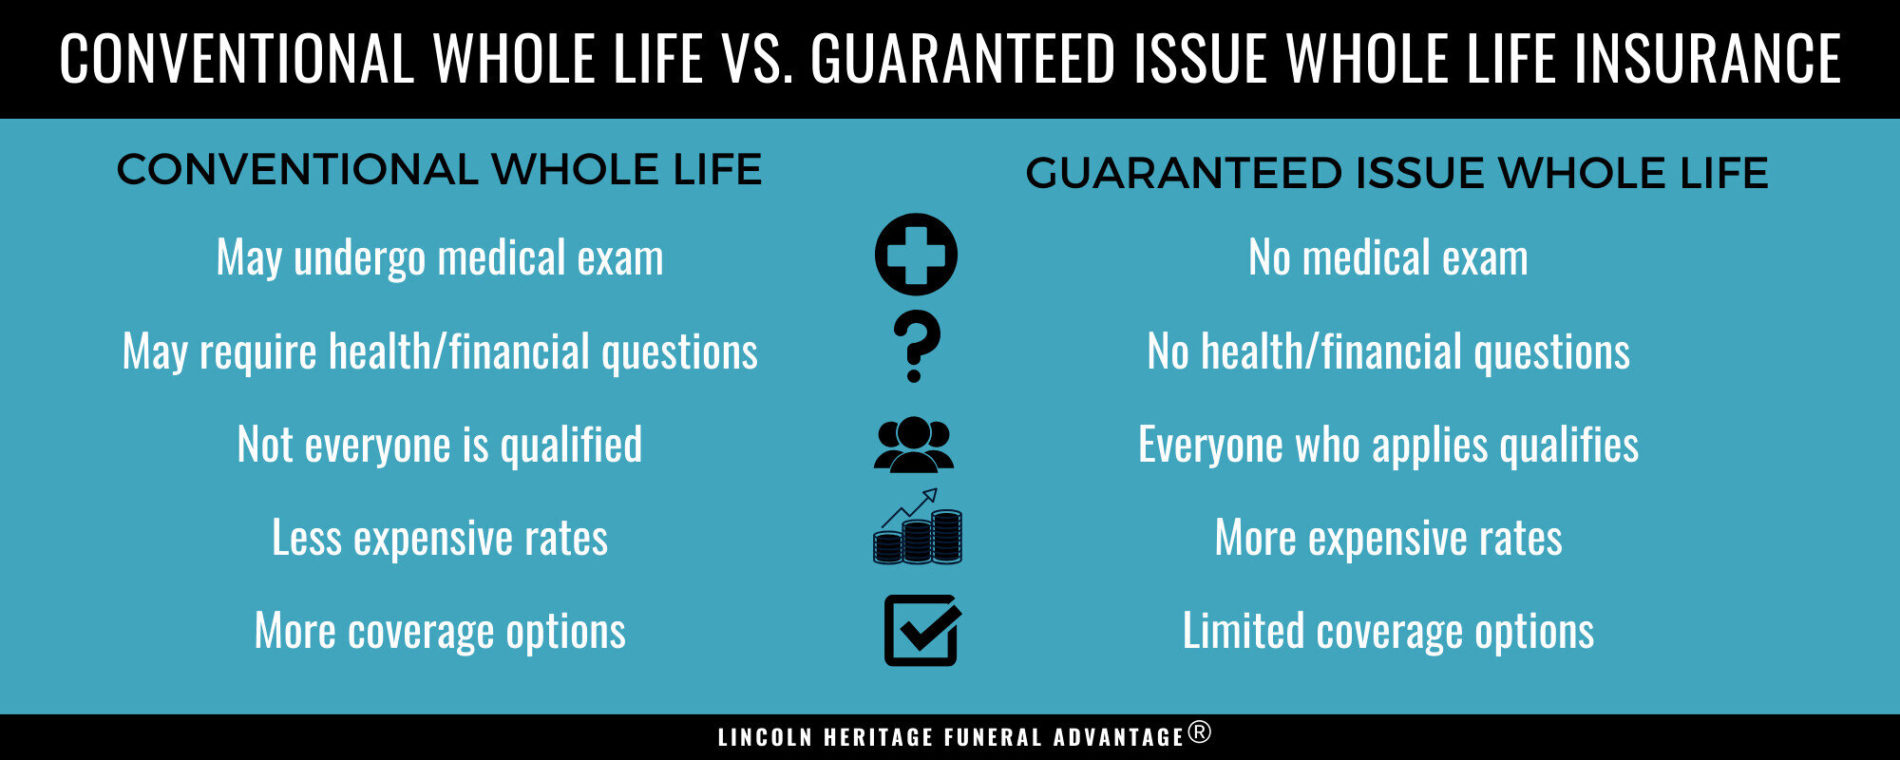 2020 Guide to Guaranteed Issue Life Insurance